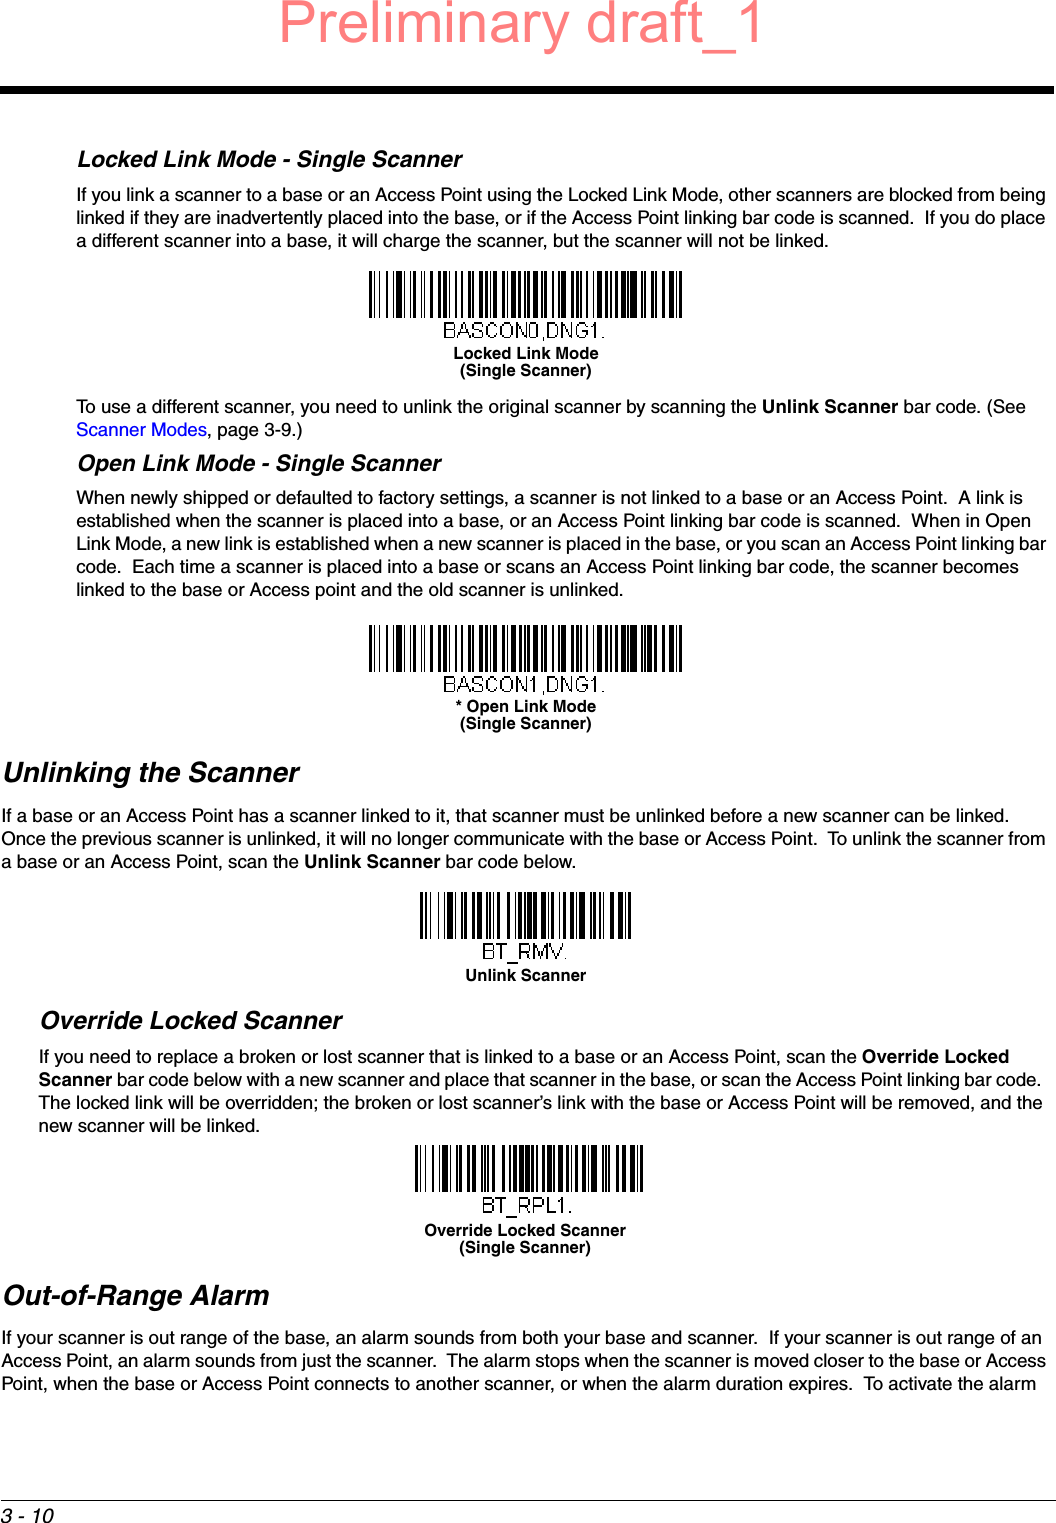 3 - 10Locked Link Mode - Single ScannerIf you link a scanner to a base or an Access Point using the Locked Link Mode, other scanners are blocked from being linked if they are inadvertently placed into the base, or if the Access Point linking bar code is scanned.  If you do place a different scanner into a base, it will charge the scanner, but the scanner will not be linked. To use a different scanner, you need to unlink the original scanner by scanning the Unlink Scanner bar code. (See Scanner Modes, page 3-9.)Open Link Mode - Single ScannerWhen newly shipped or defaulted to factory settings, a scanner is not linked to a base or an Access Point.  A link is established when the scanner is placed into a base, or an Access Point linking bar code is scanned.  When in Open Link Mode, a new link is established when a new scanner is placed in the base, or you scan an Access Point linking bar code.  Each time a scanner is placed into a base or scans an Access Point linking bar code, the scanner becomes linked to the base or Access point and the old scanner is unlinked.Unlinking the ScannerIf a base or an Access Point has a scanner linked to it, that scanner must be unlinked before a new scanner can be linked.  Once the previous scanner is unlinked, it will no longer communicate with the base or Access Point.  To unlink the scanner from a base or an Access Point, scan the Unlink Scanner bar code below.Override Locked ScannerIf you need to replace a broken or lost scanner that is linked to a base or an Access Point, scan the Override Locked Scanner bar code below with a new scanner and place that scanner in the base, or scan the Access Point linking bar code.  The locked link will be overridden; the broken or lost scanner’s link with the base or Access Point will be removed, and the new scanner will be linked.Out-of-Range AlarmIf your scanner is out range of the base, an alarm sounds from both your base and scanner.  If your scanner is out range of an Access Point, an alarm sounds from just the scanner.  The alarm stops when the scanner is moved closer to the base or Access Point, when the base or Access Point connects to another scanner, or when the alarm duration expires.  To activate the alarm Locked Link Mode(Single Scanner)* Open Link Mode(Single Scanner)Unlink ScannerOverride Locked Scanner(Single Scanner)Preliminary draft_1